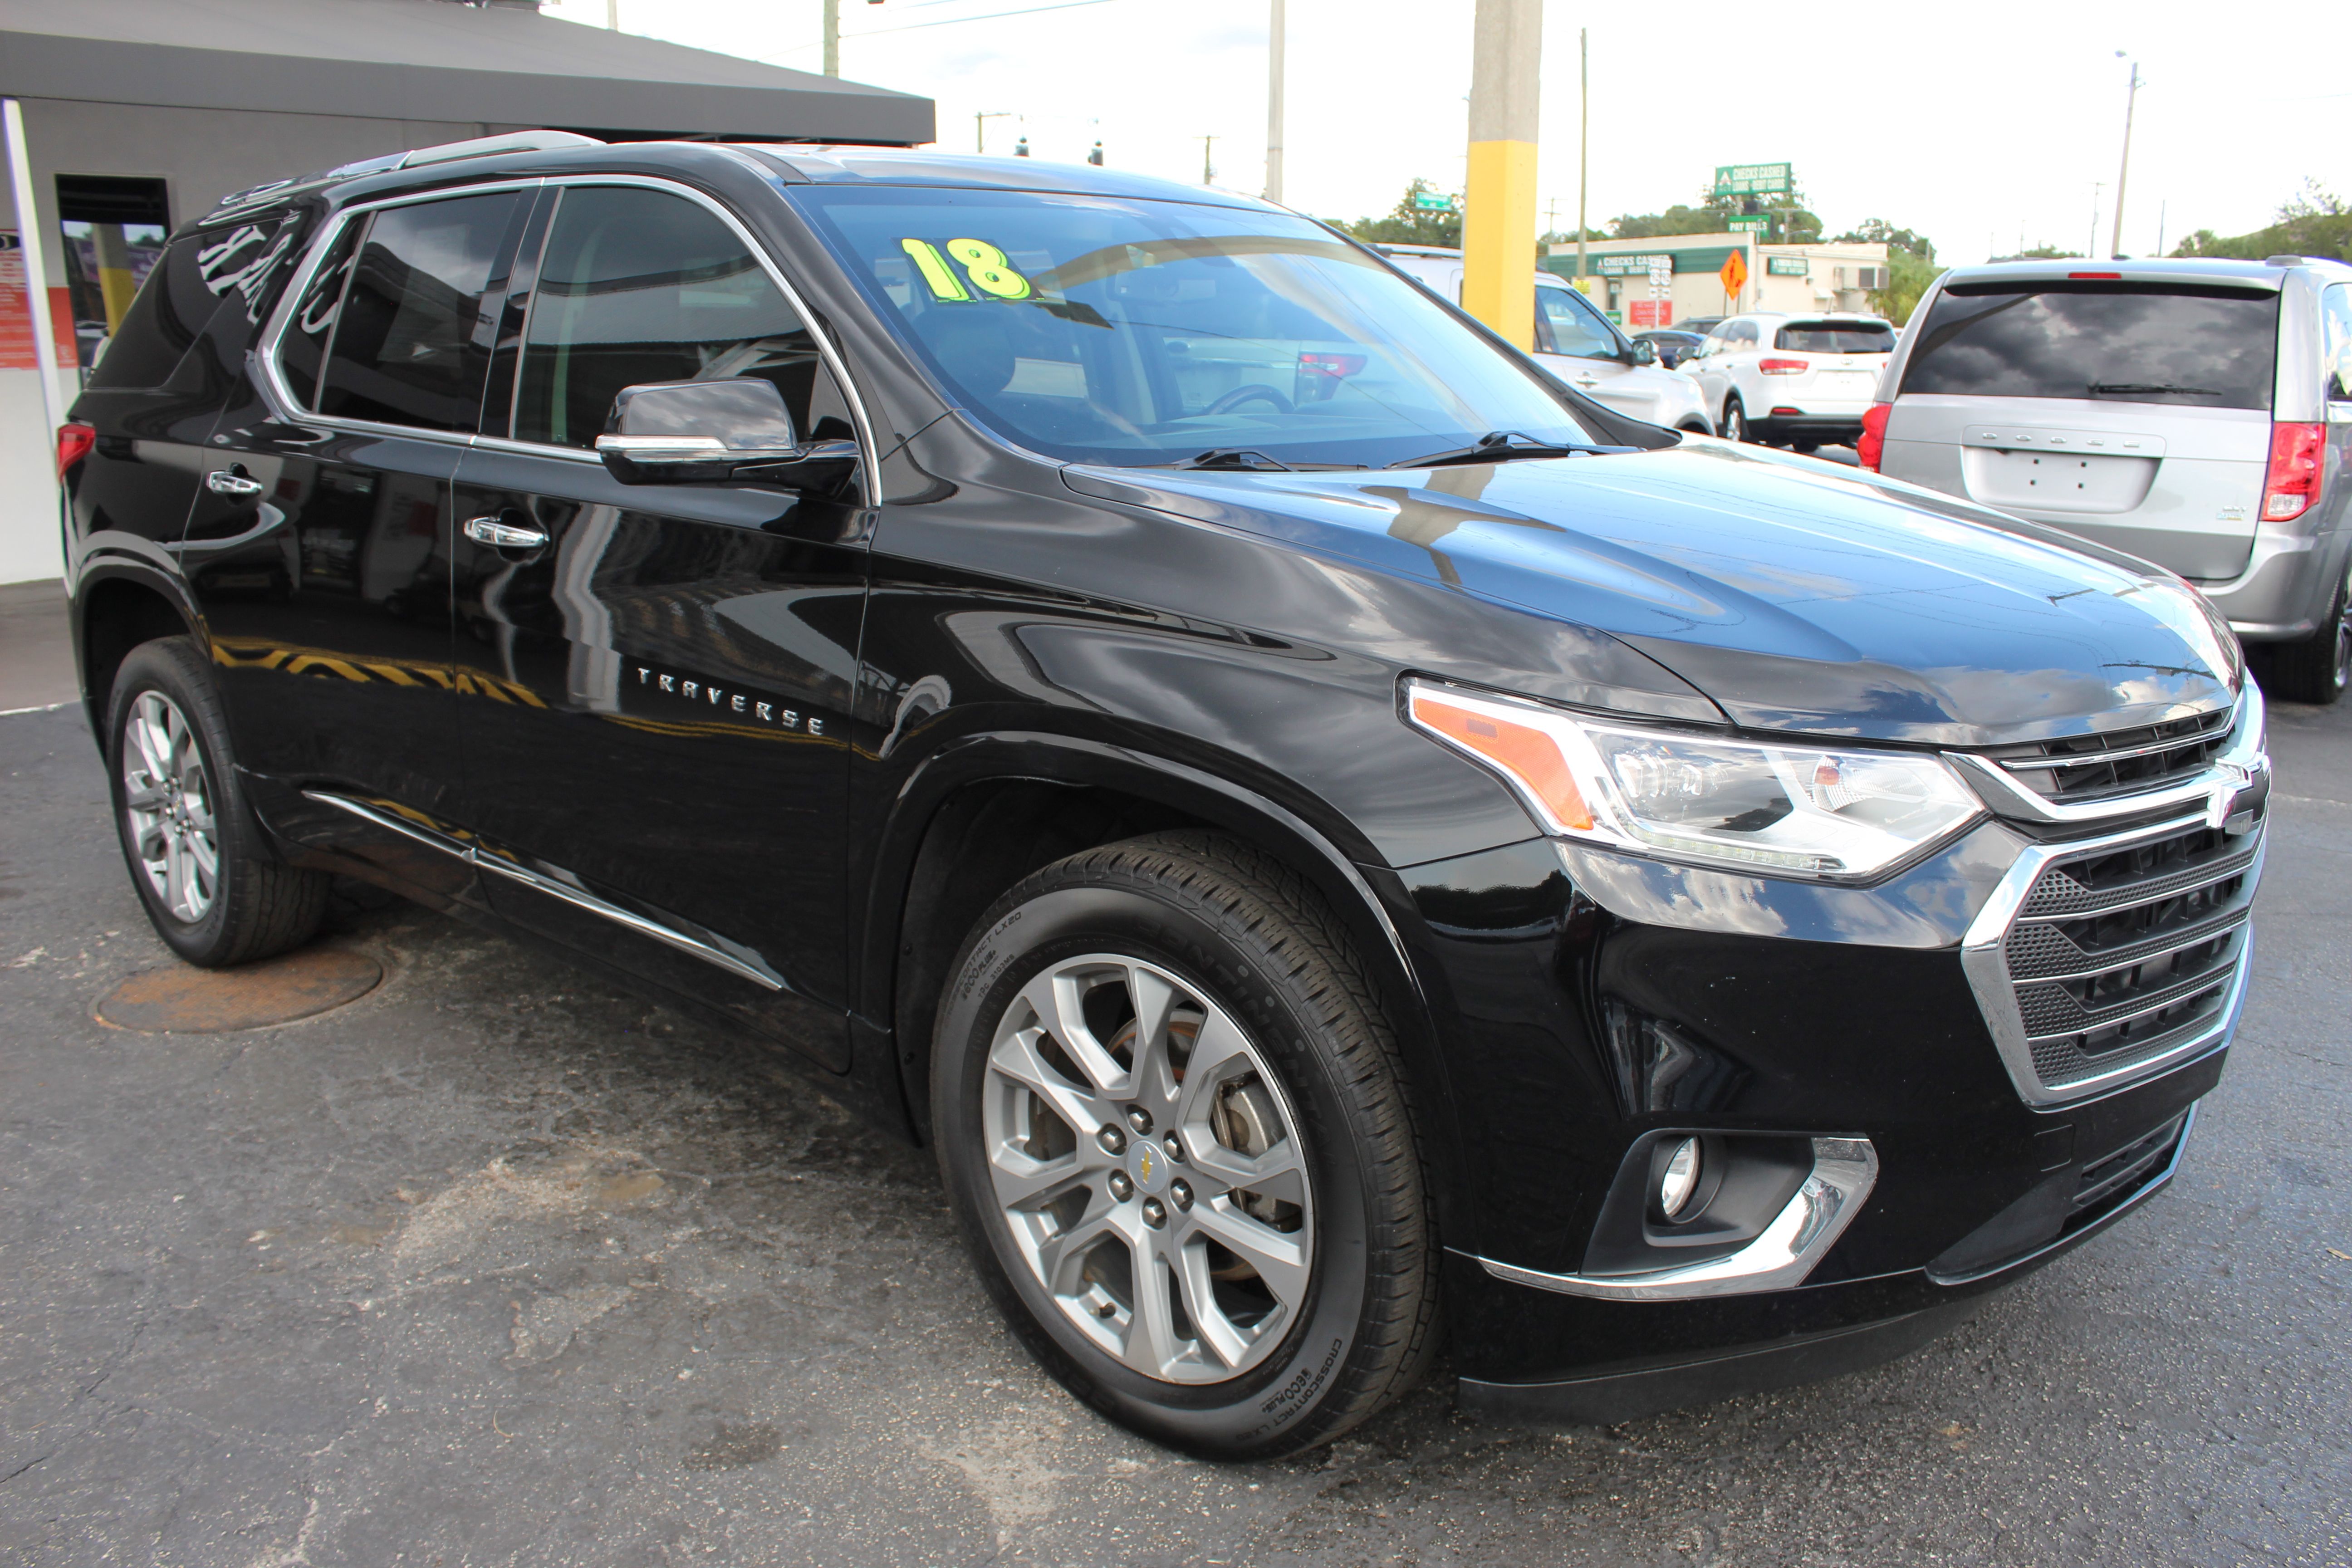 Pre-Owned 2018 Chevrolet Traverse Premier Utility in Tampa #2541 | Car